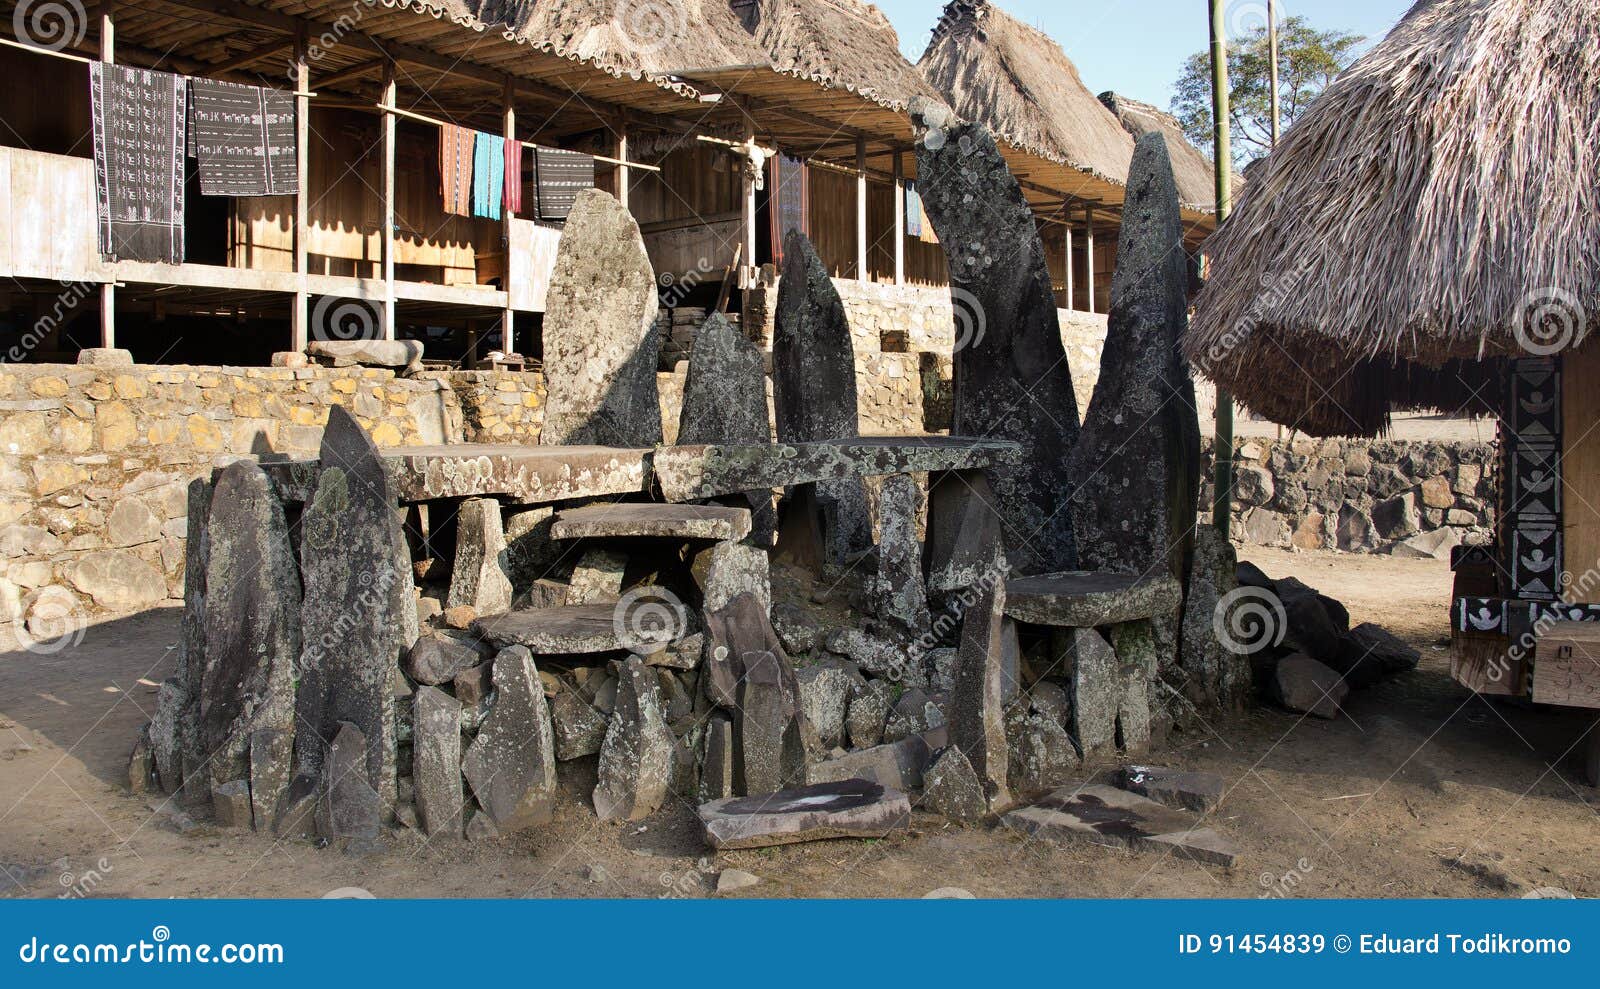 stone tablets in bena a traditional village with grass huts of the ngada people in flores.